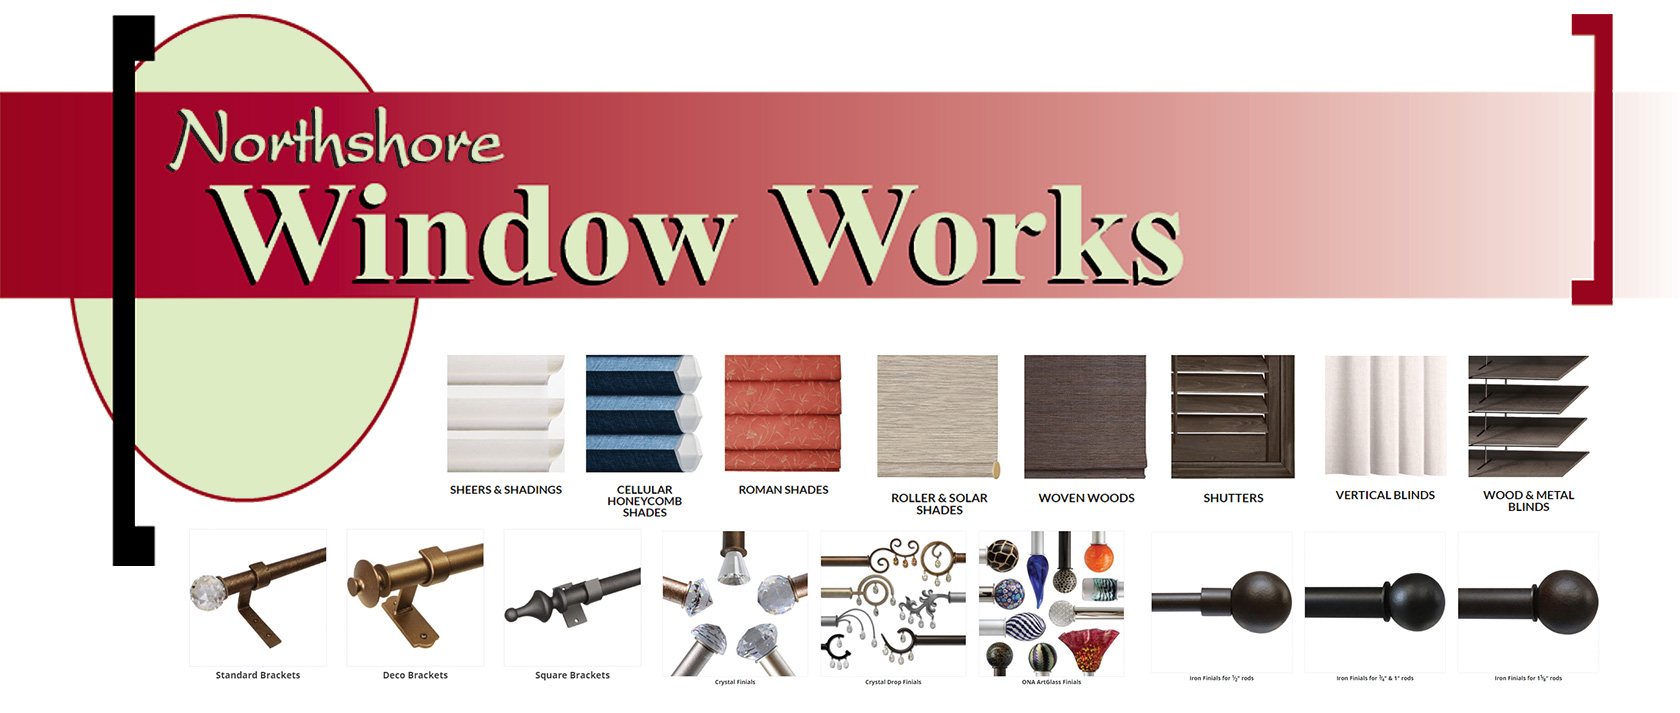 Northshore Window Works Product Lineup